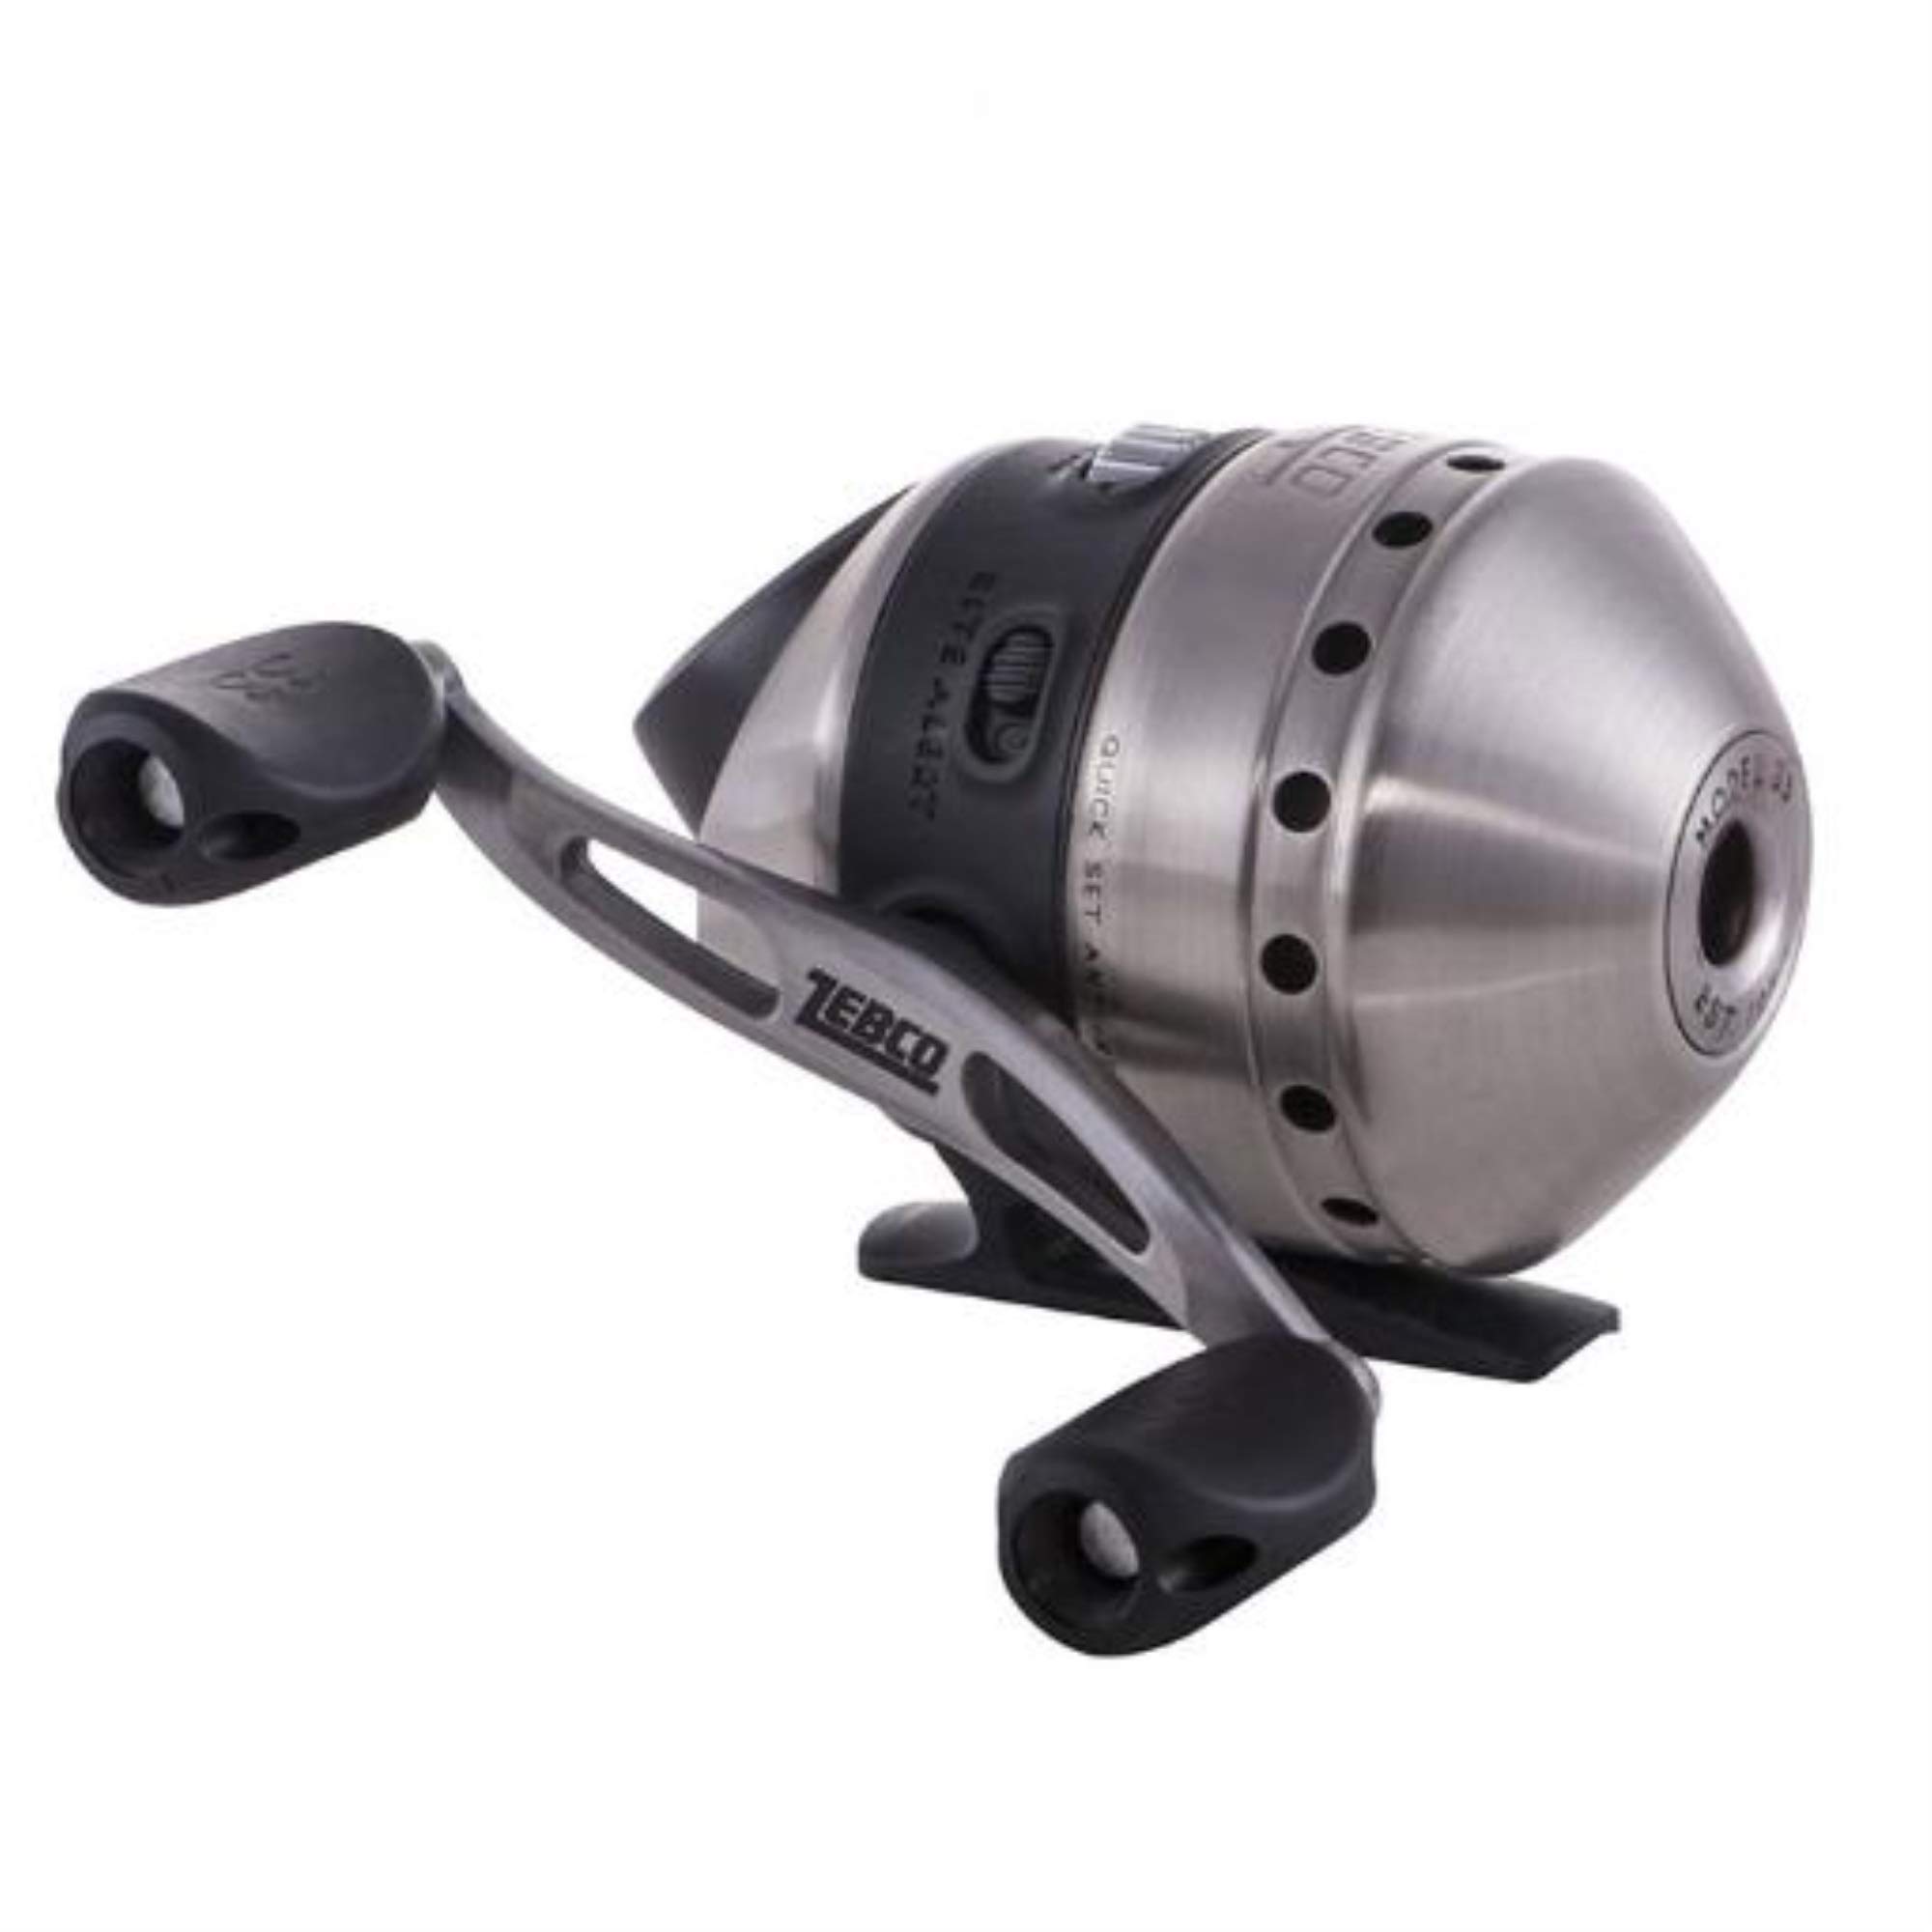 Zebco 33 Spinning Reel and Telescopic Fishing Rod Combo 6 Foot